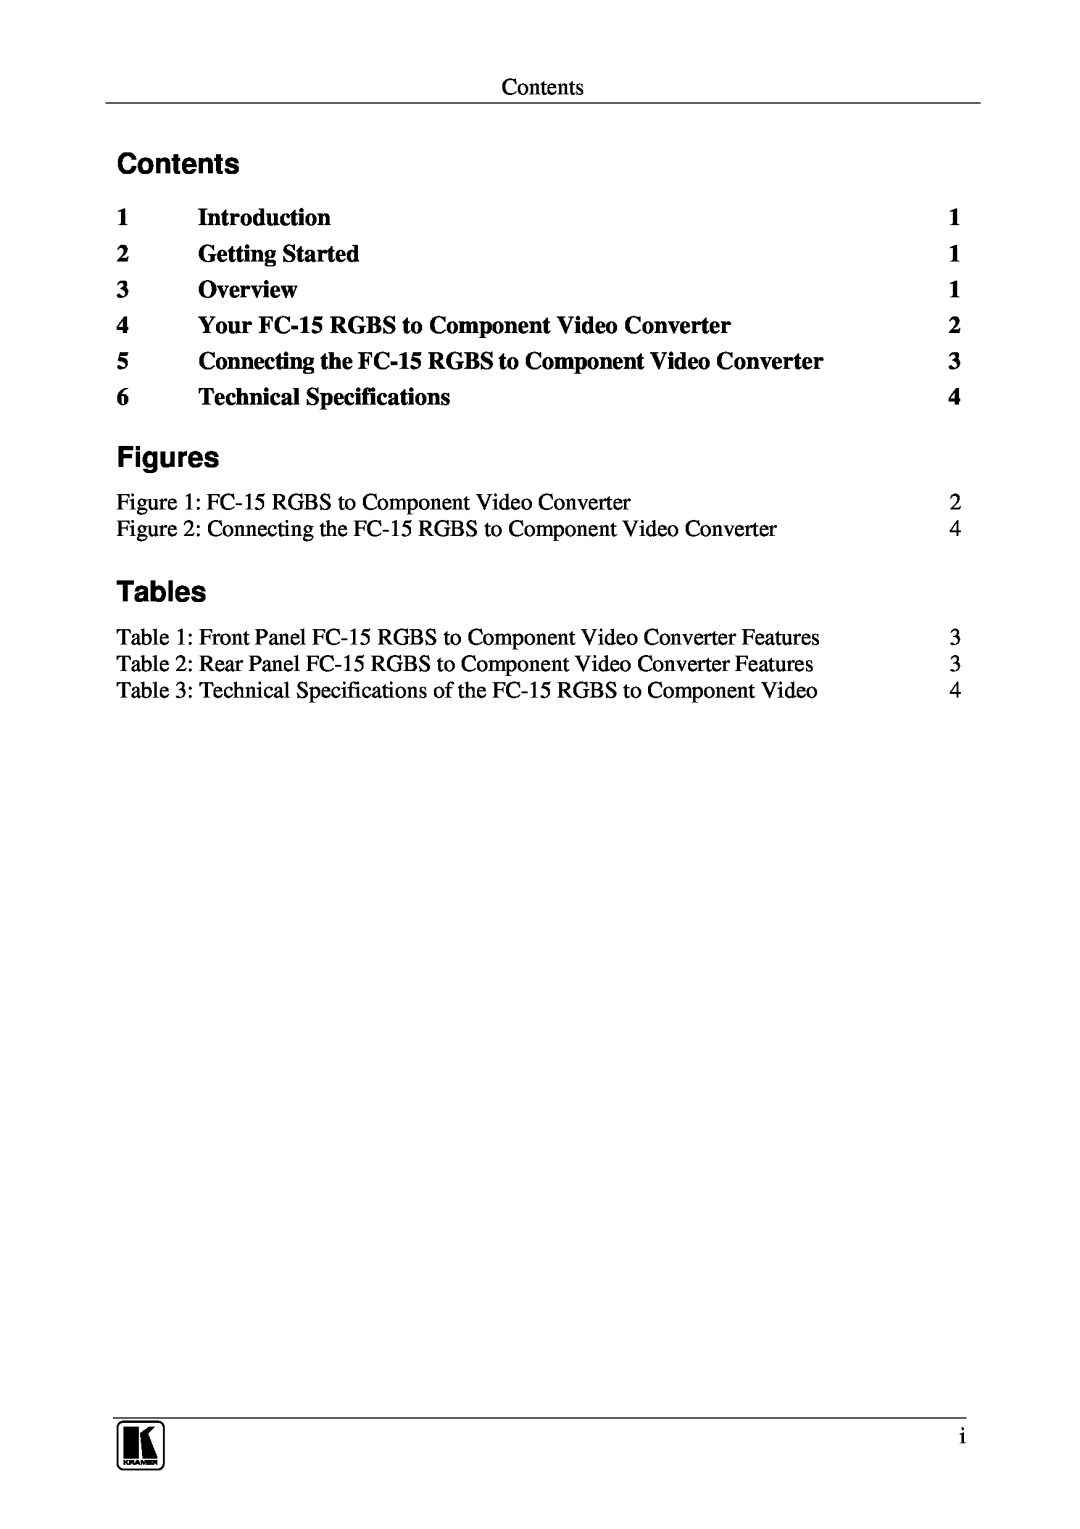 Kramer Electronics FC-15 Contents, Figures, Tables, Introduction, Getting Started, Overview, Technical Specifications 